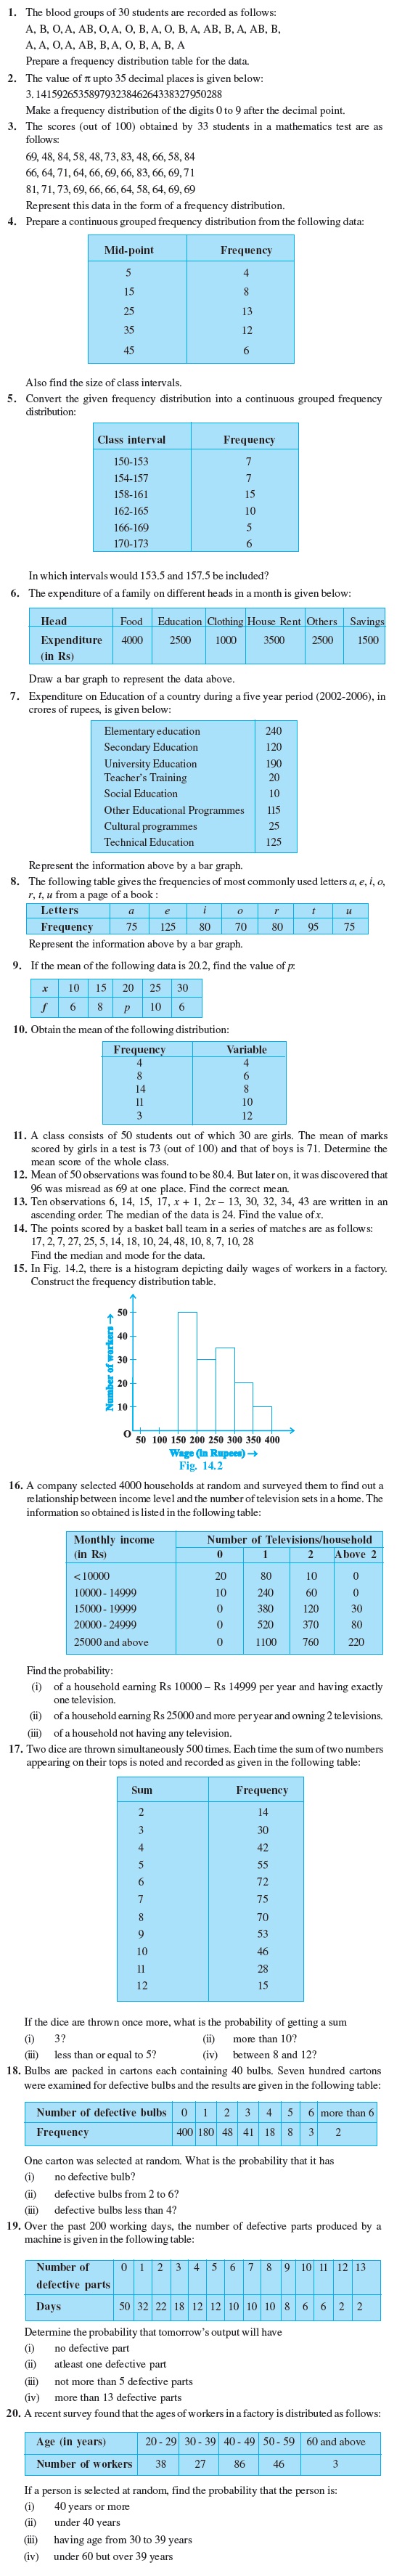 Class 9 Important Questions for Maths - Statistics and Probability